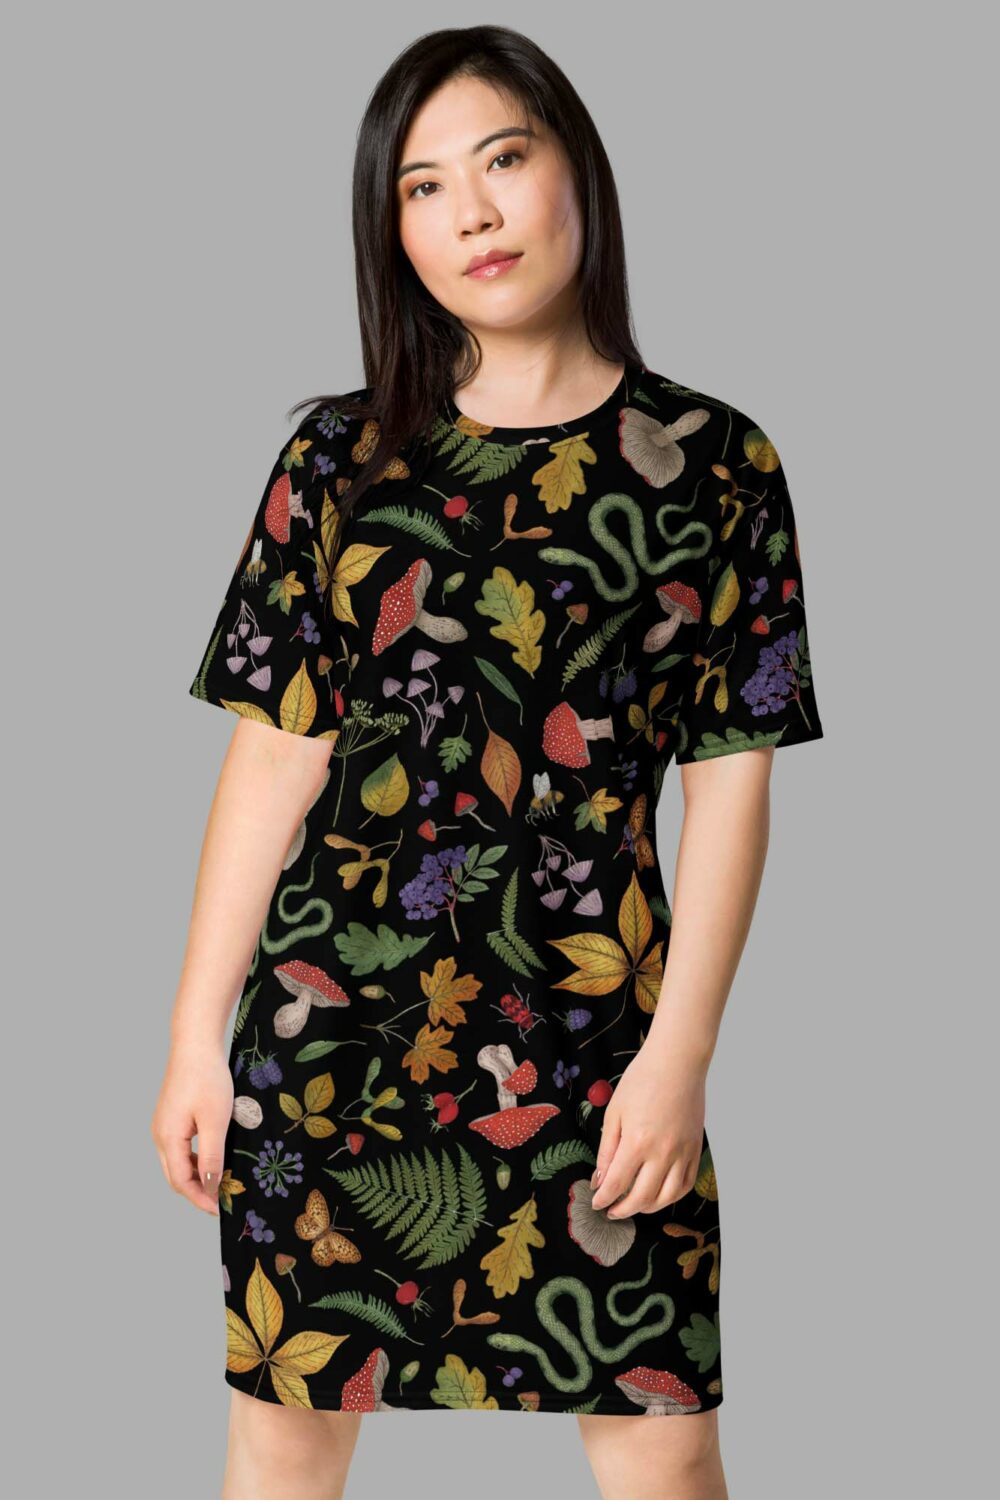 cosmic drifters hedge witch print t shirt dress front